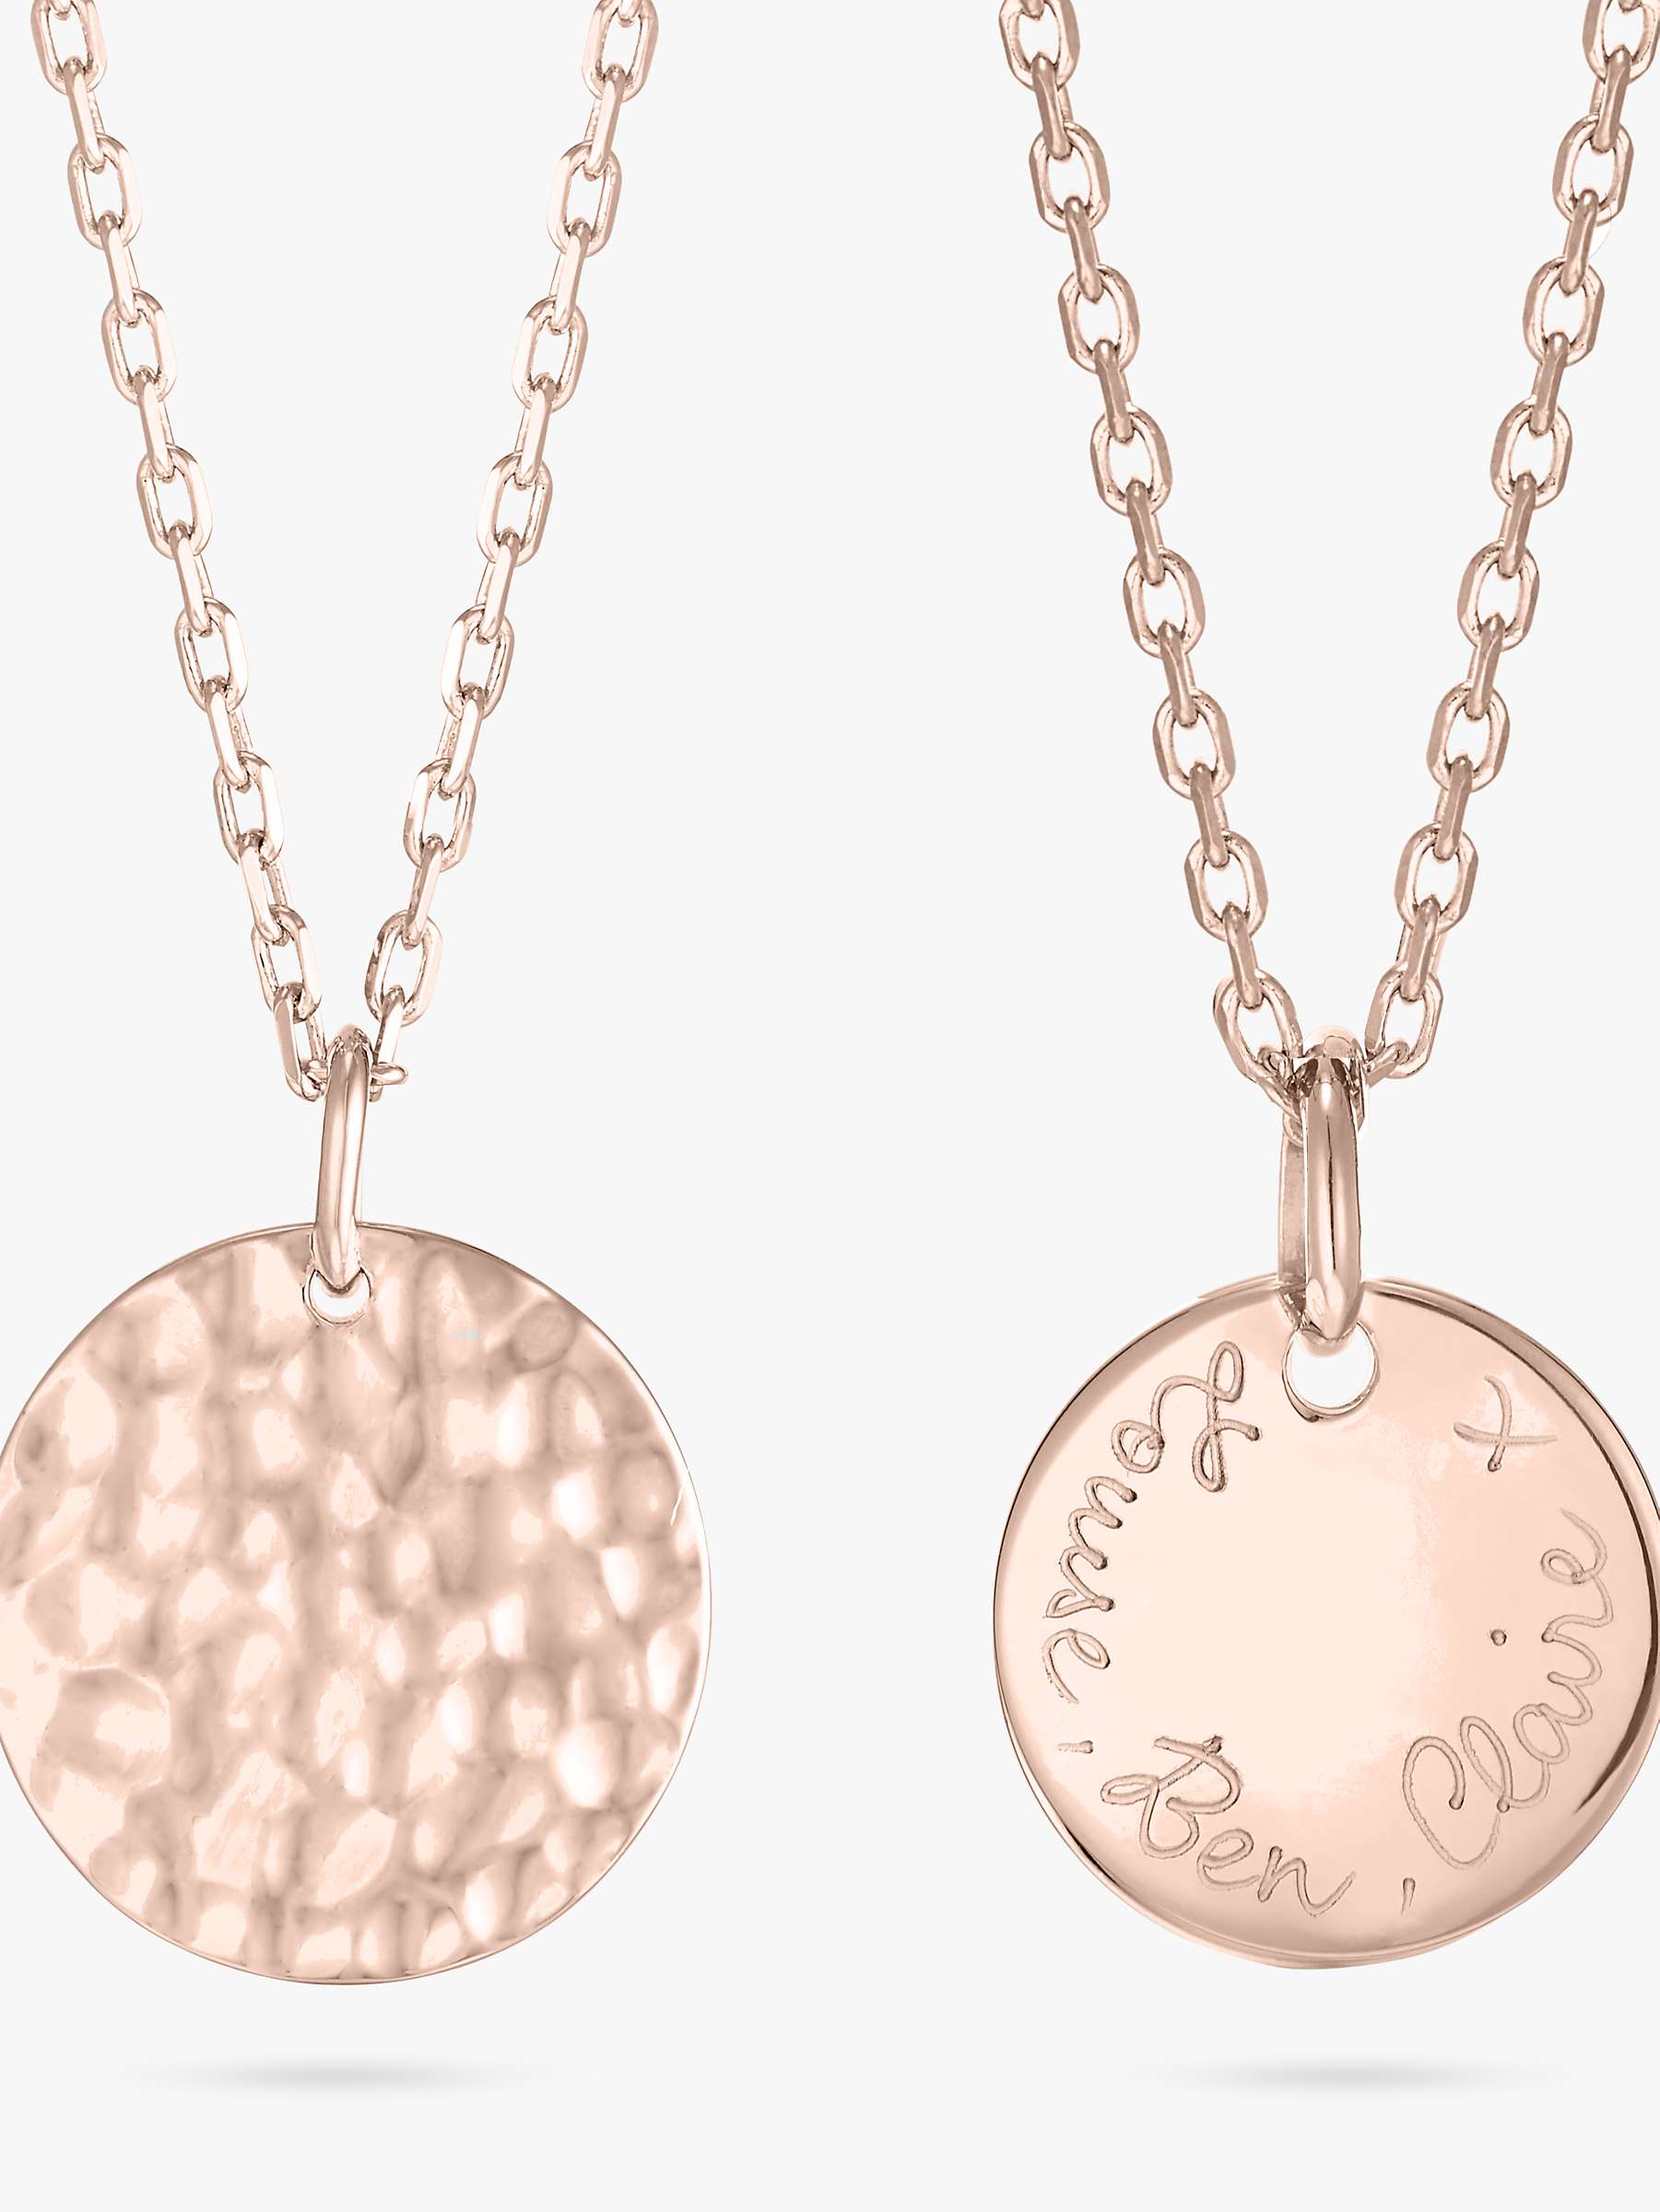 Buy Merci Maman Personalised Small Hammered Pendant Necklace Online at johnlewis.com